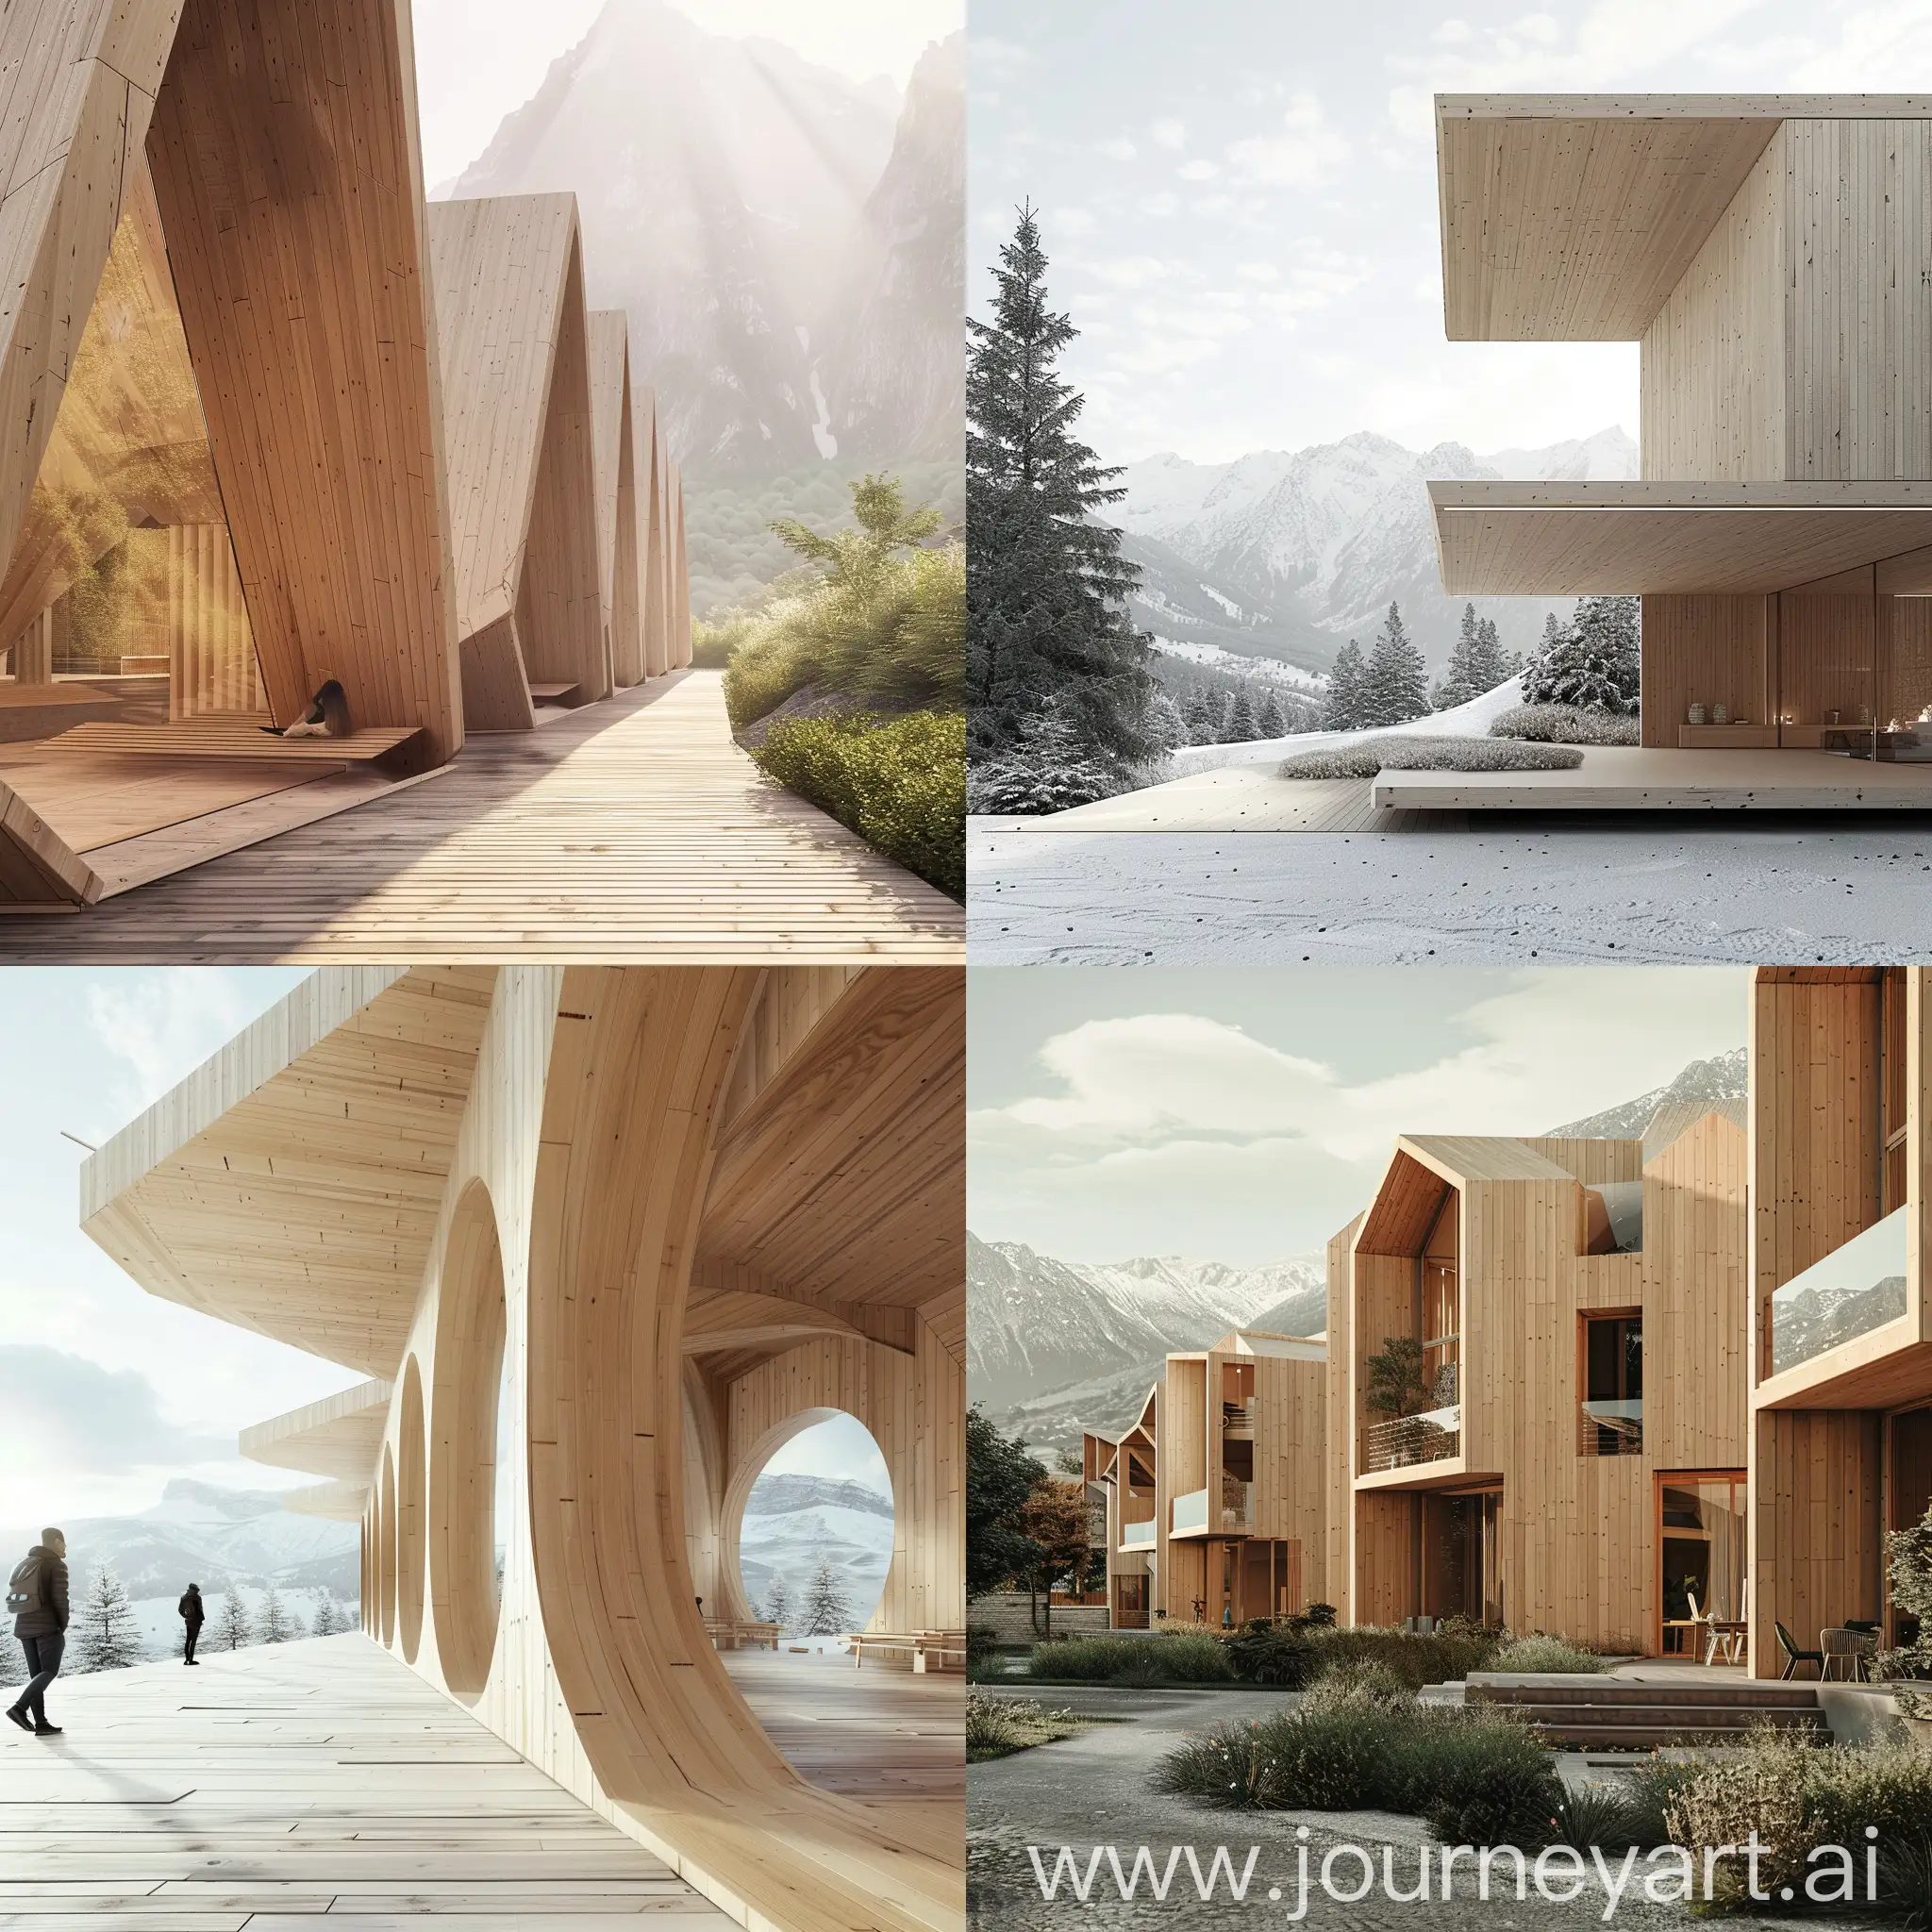 timber module joint detailed architectural render, the module is in line with discreet modular architecture principles as each module can be combined with other modules to create variety of architectural structures and shapes, the module is inspired by mountain Alpine culture